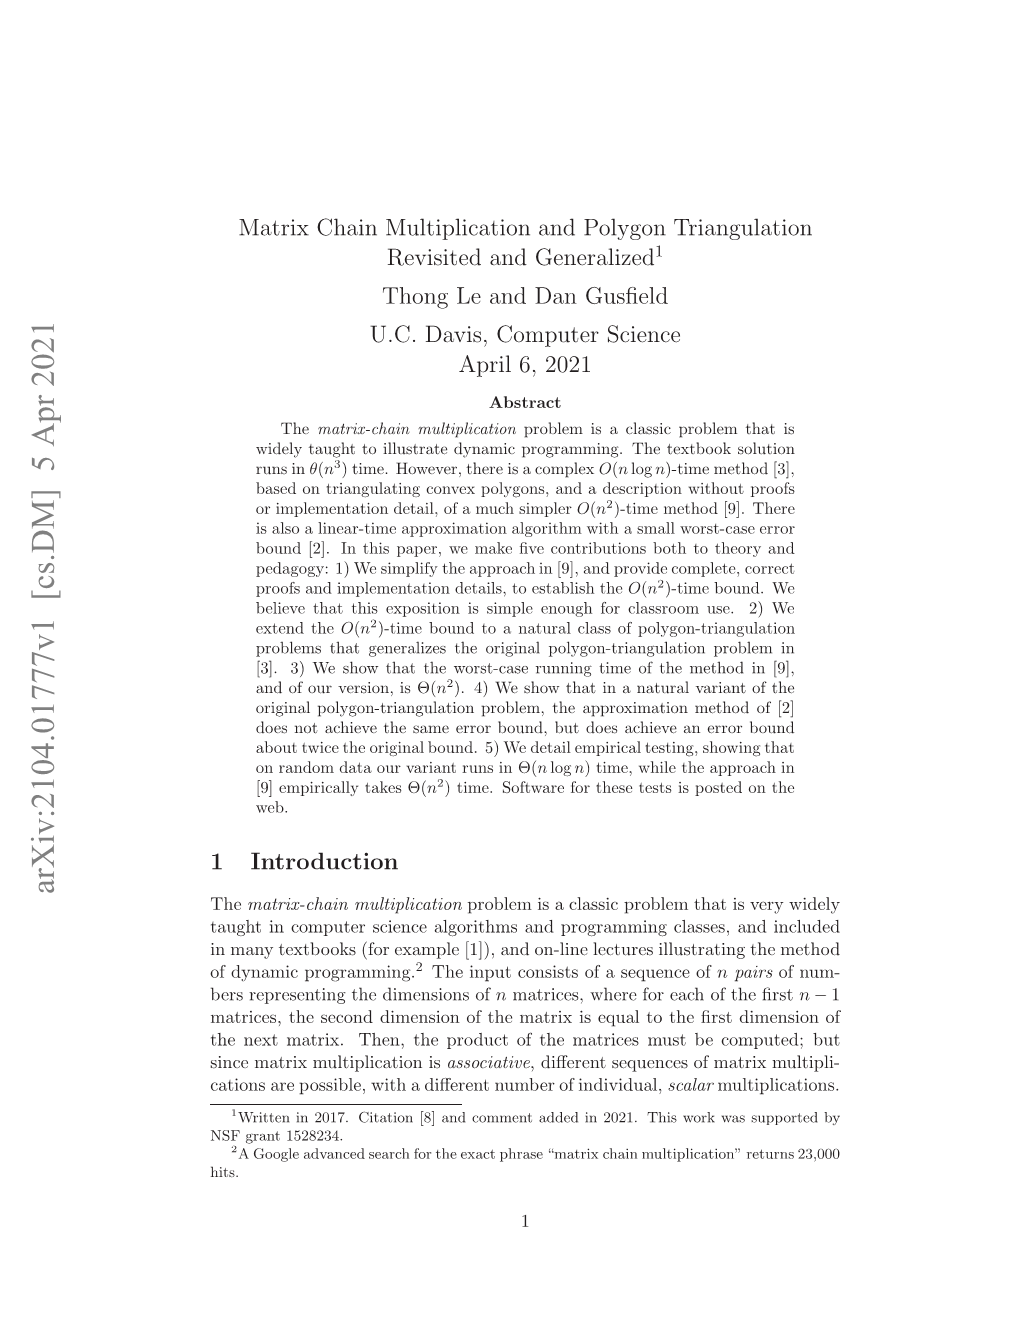 Matrix Chain Multiplication and Polygon Triangulation Revisited